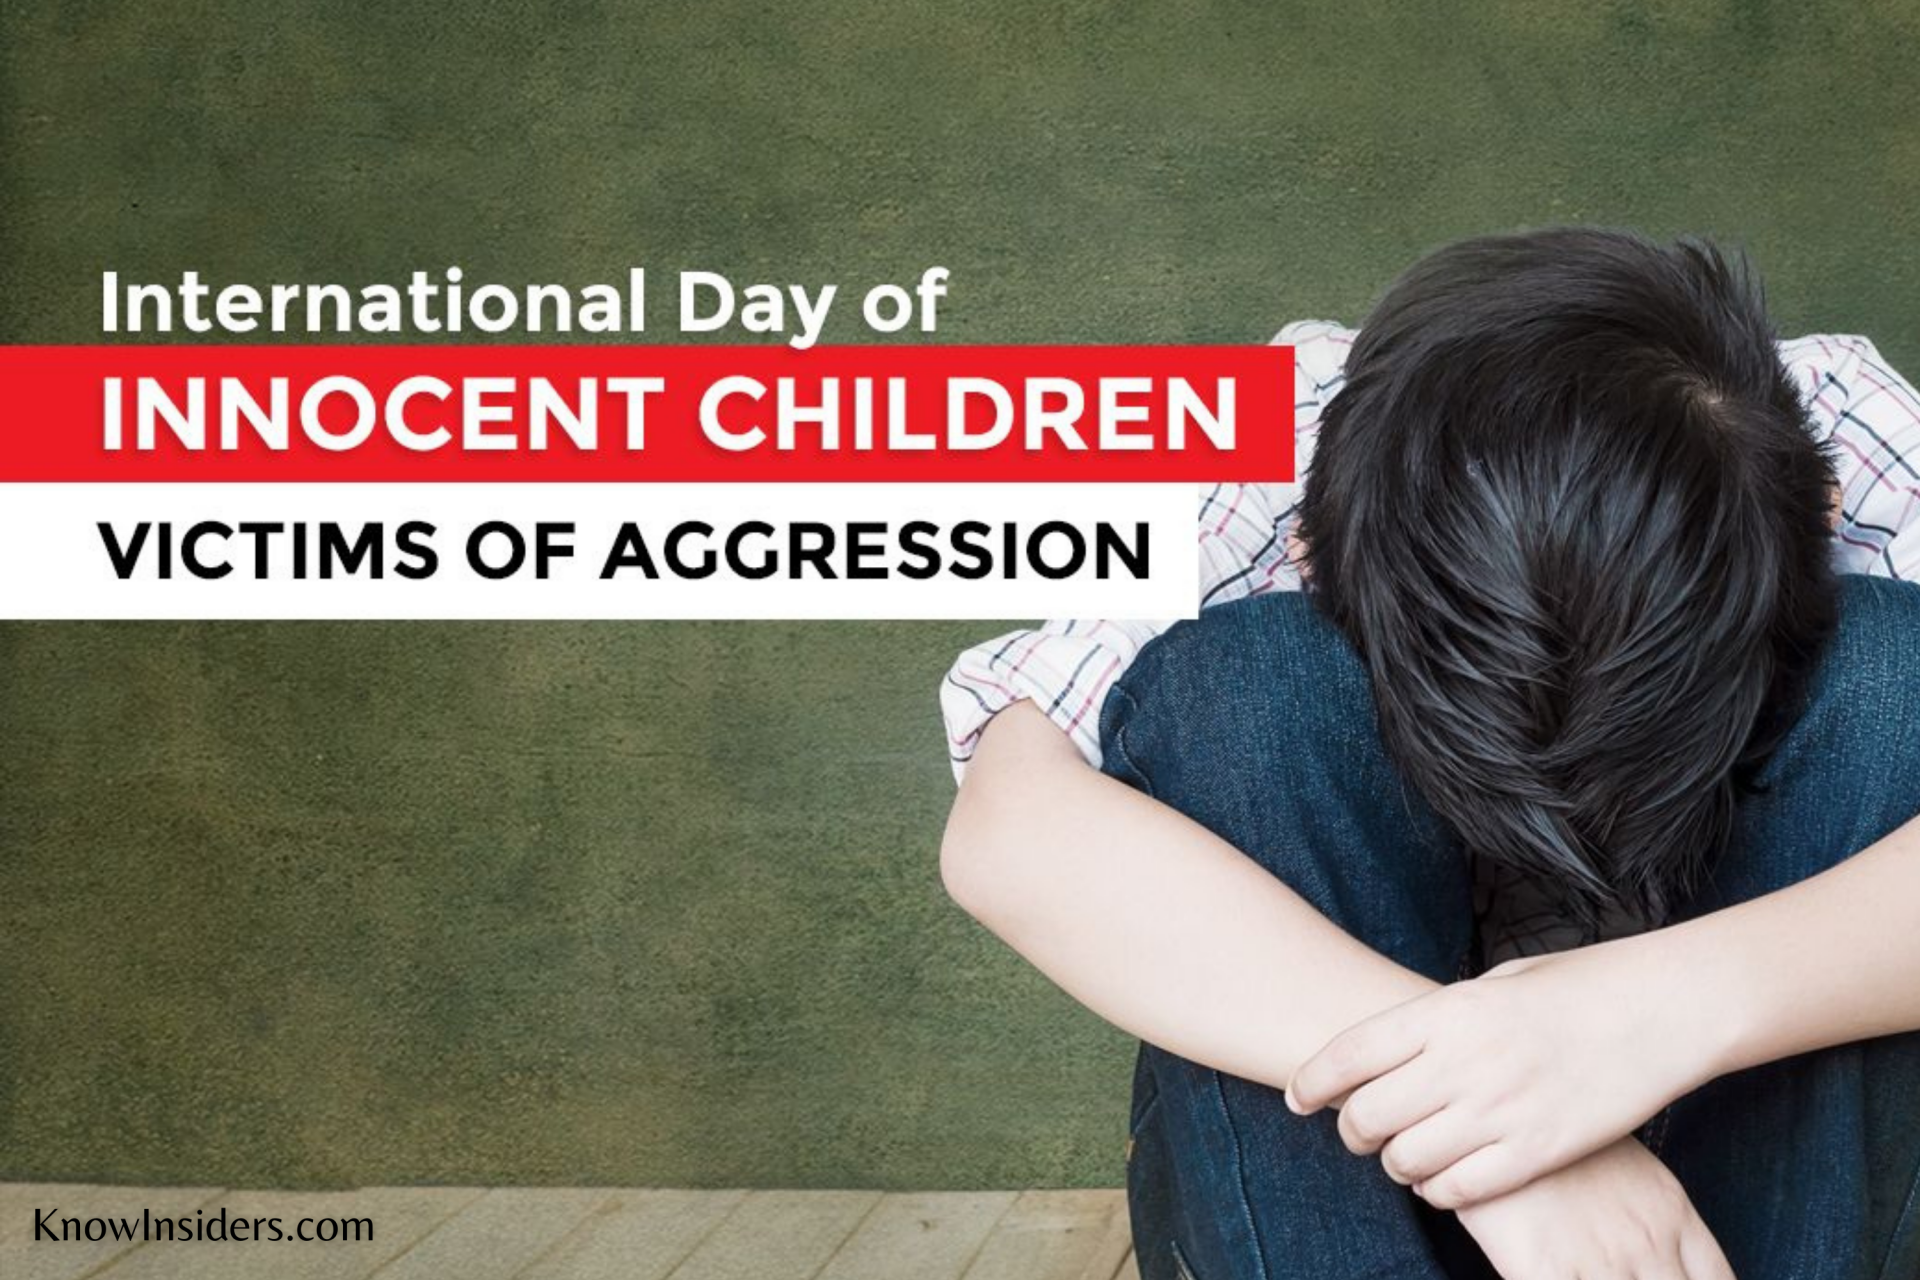 International Day of Innocent Children Victims of Aggression: History, Significance and Celebrations